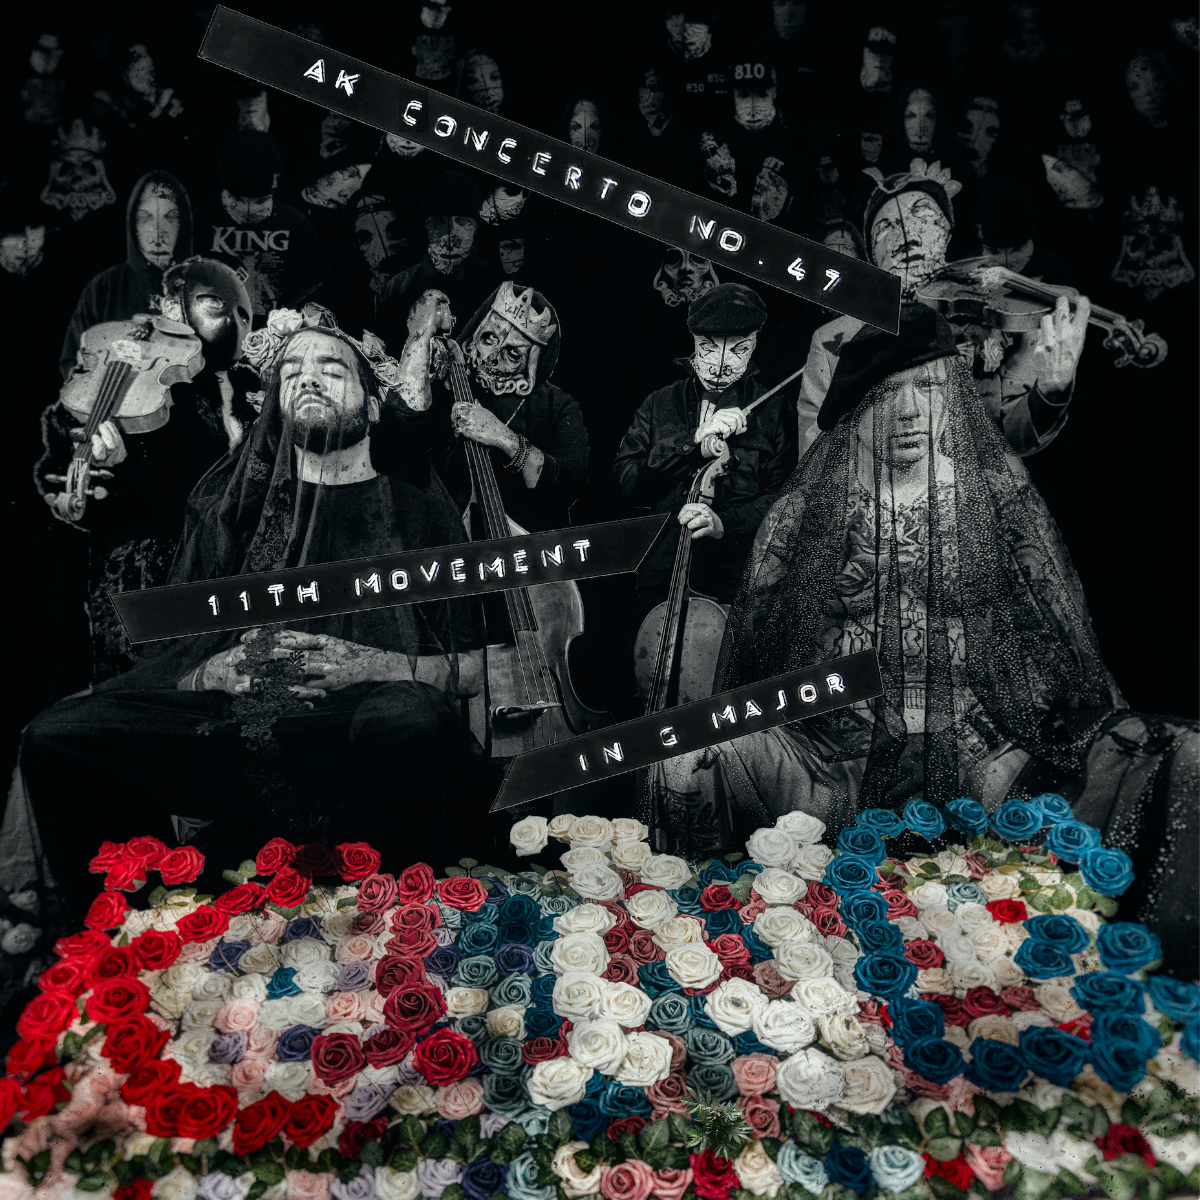 KING 810's New Album "AK Concerto No. 47, 11th Movement in G Major" Out Today